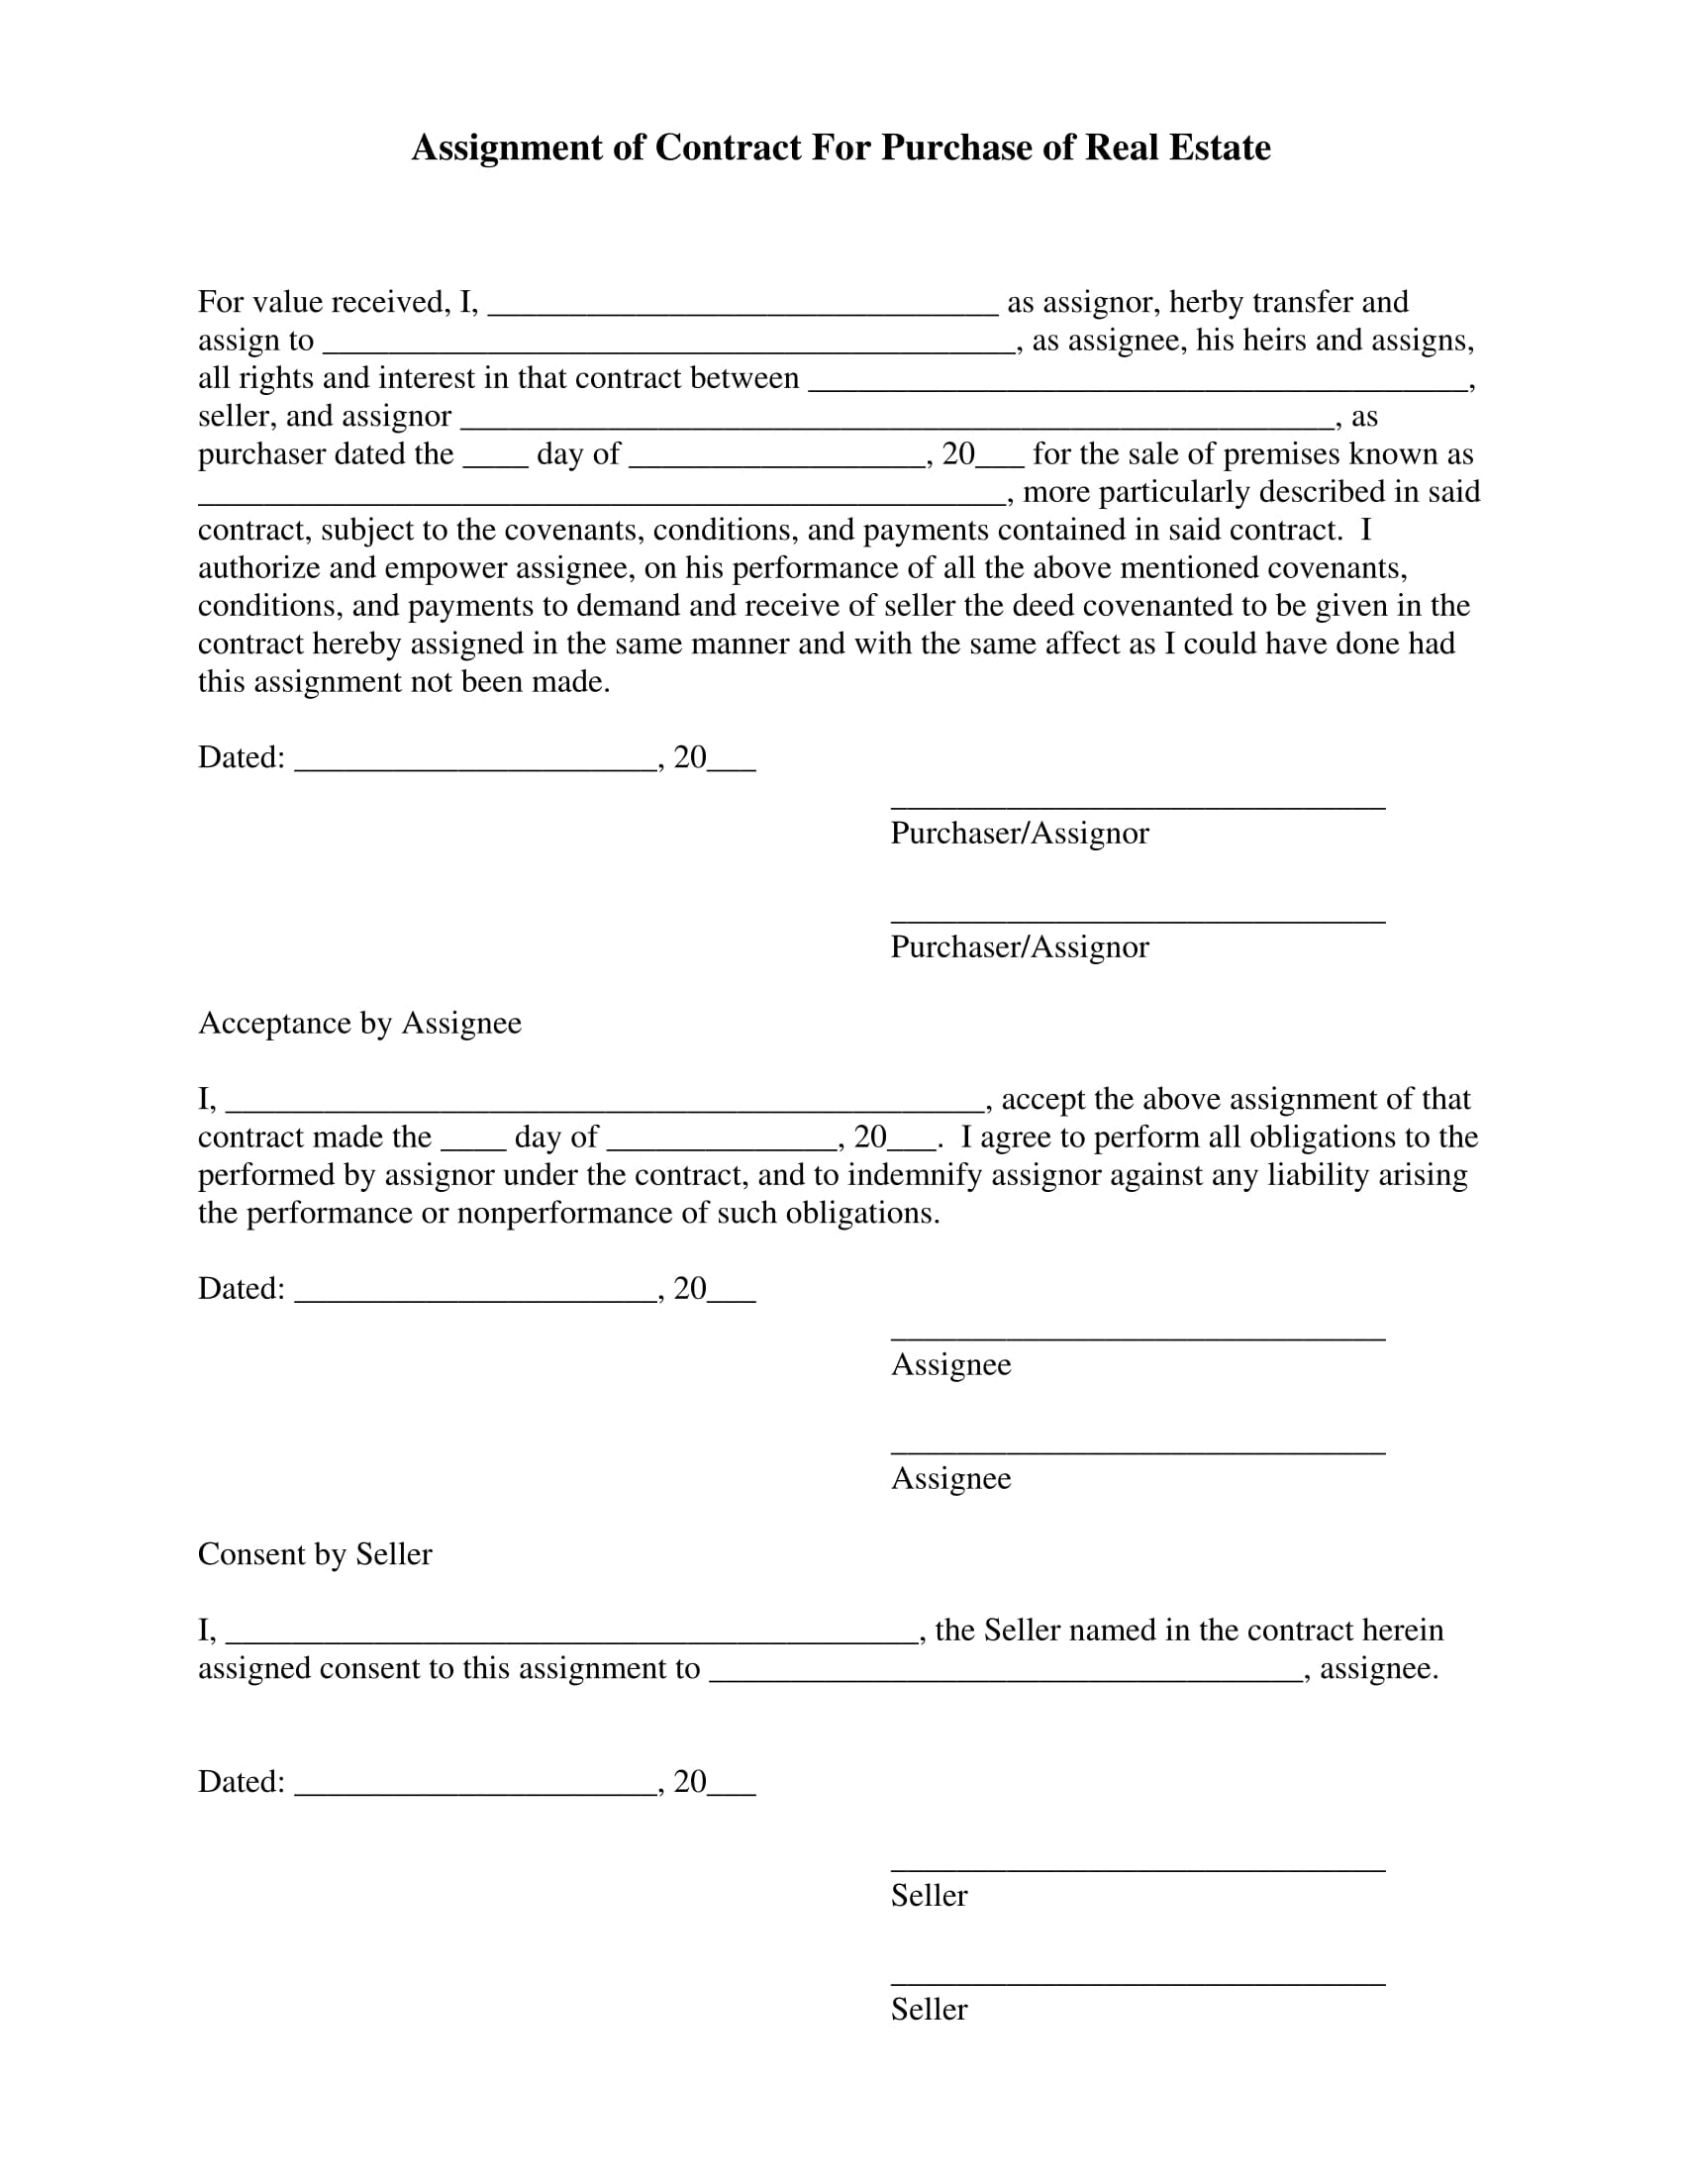 Consent To Assignment Agreement Template | Hq Template Documents Regarding Contract Assignment Agreement Template